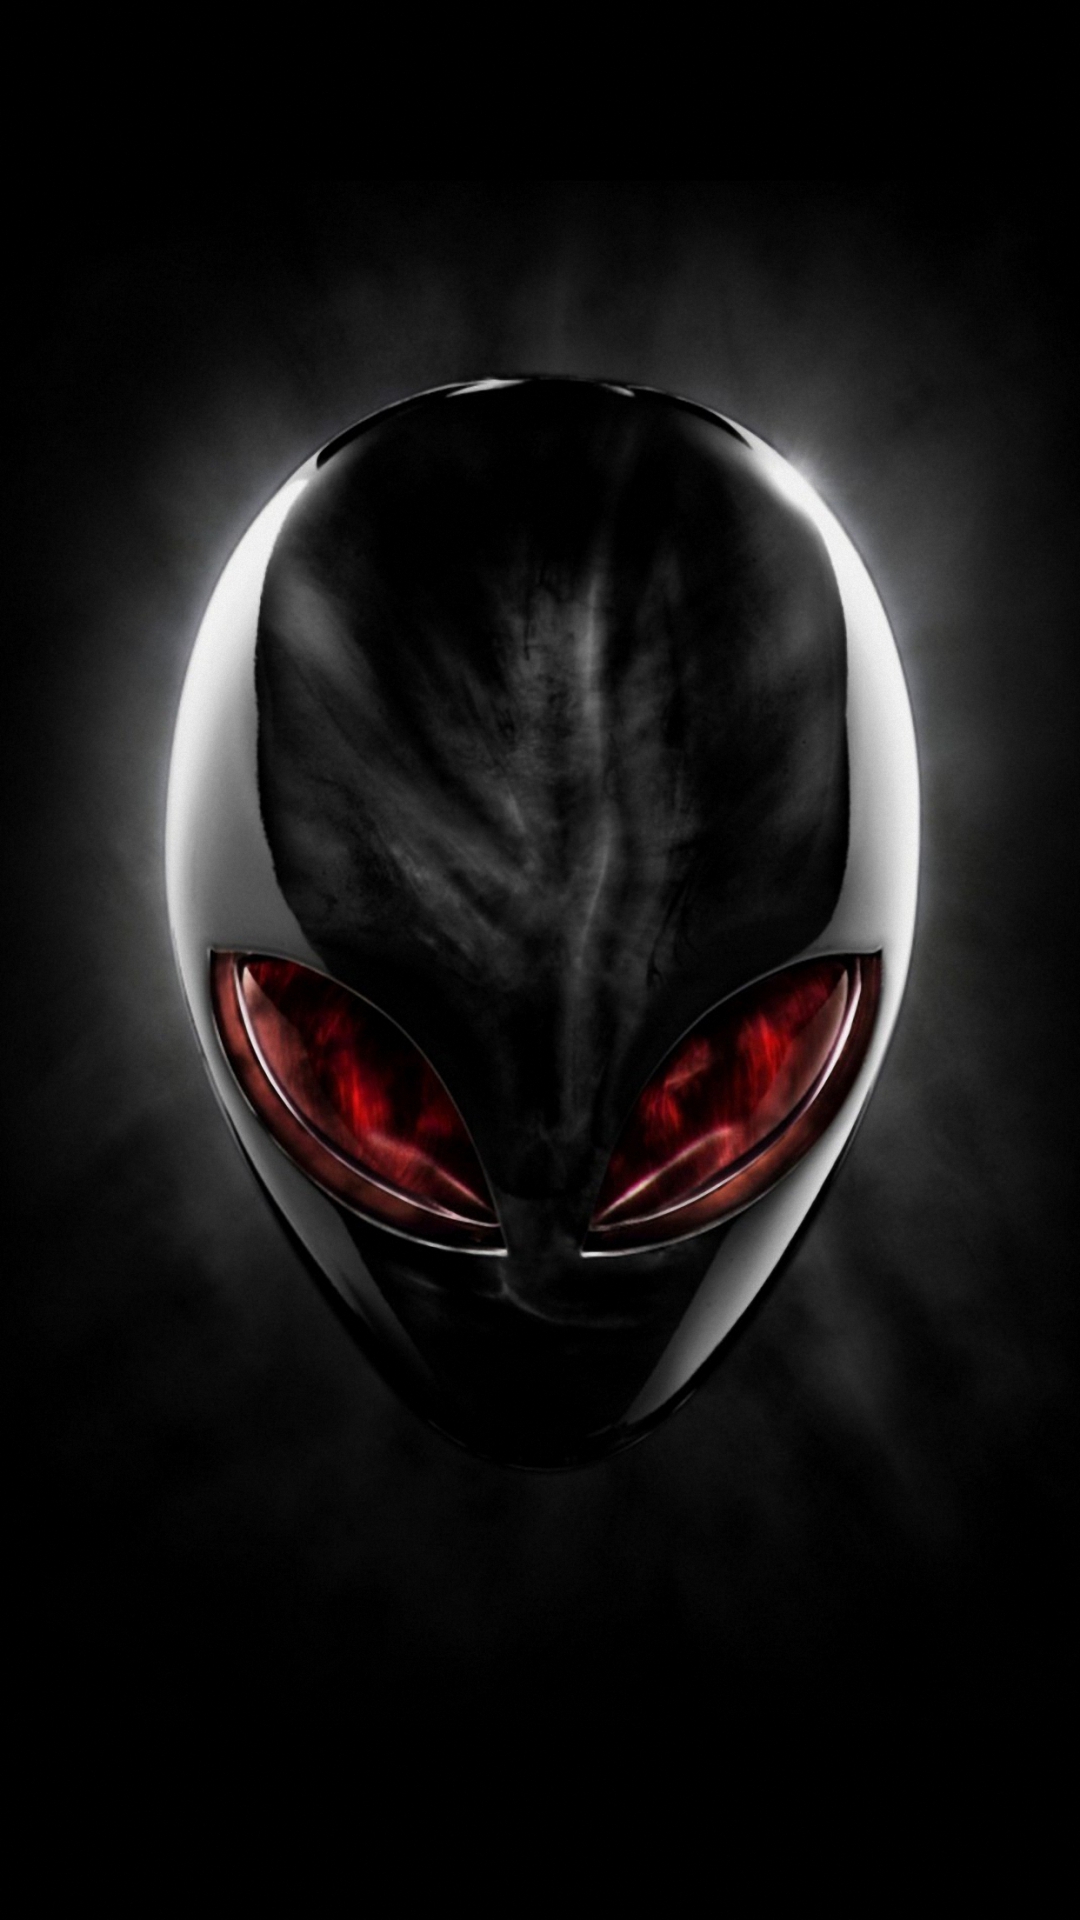 Free download download cool alienware wallpaper for iphone 6s plus ...